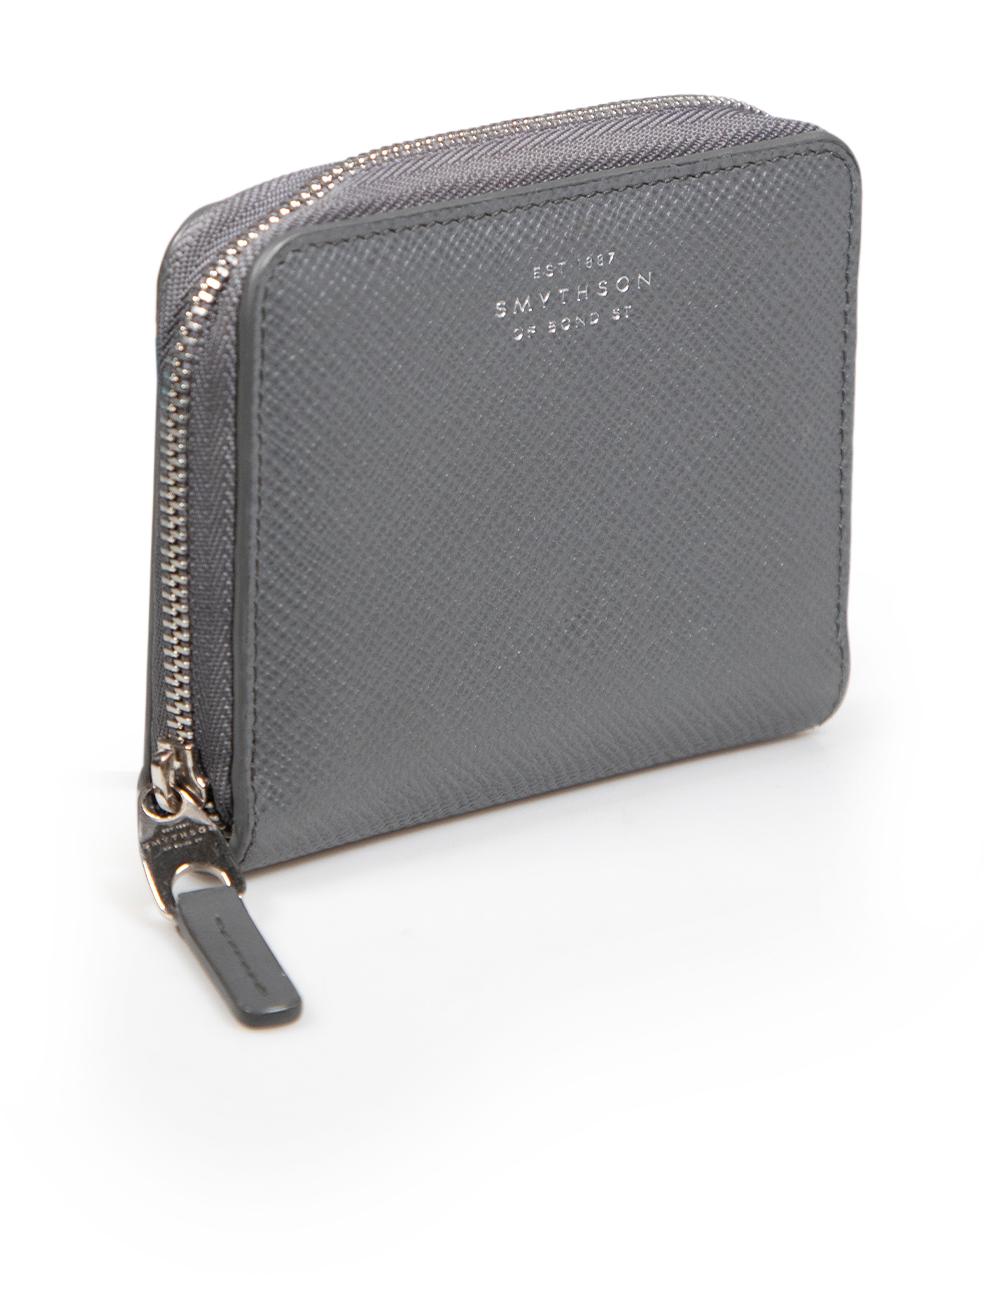 CONDITION is Very good. Minimal wear to purse is evident. Minor tarnishing to zip puller on this used Smythson designer resale item.
 
 Details
 Grey
 Leather
 Wallet
 Zip fastening
 Silver logo stamp
 1x Main compartment
 4x Internal card holders
